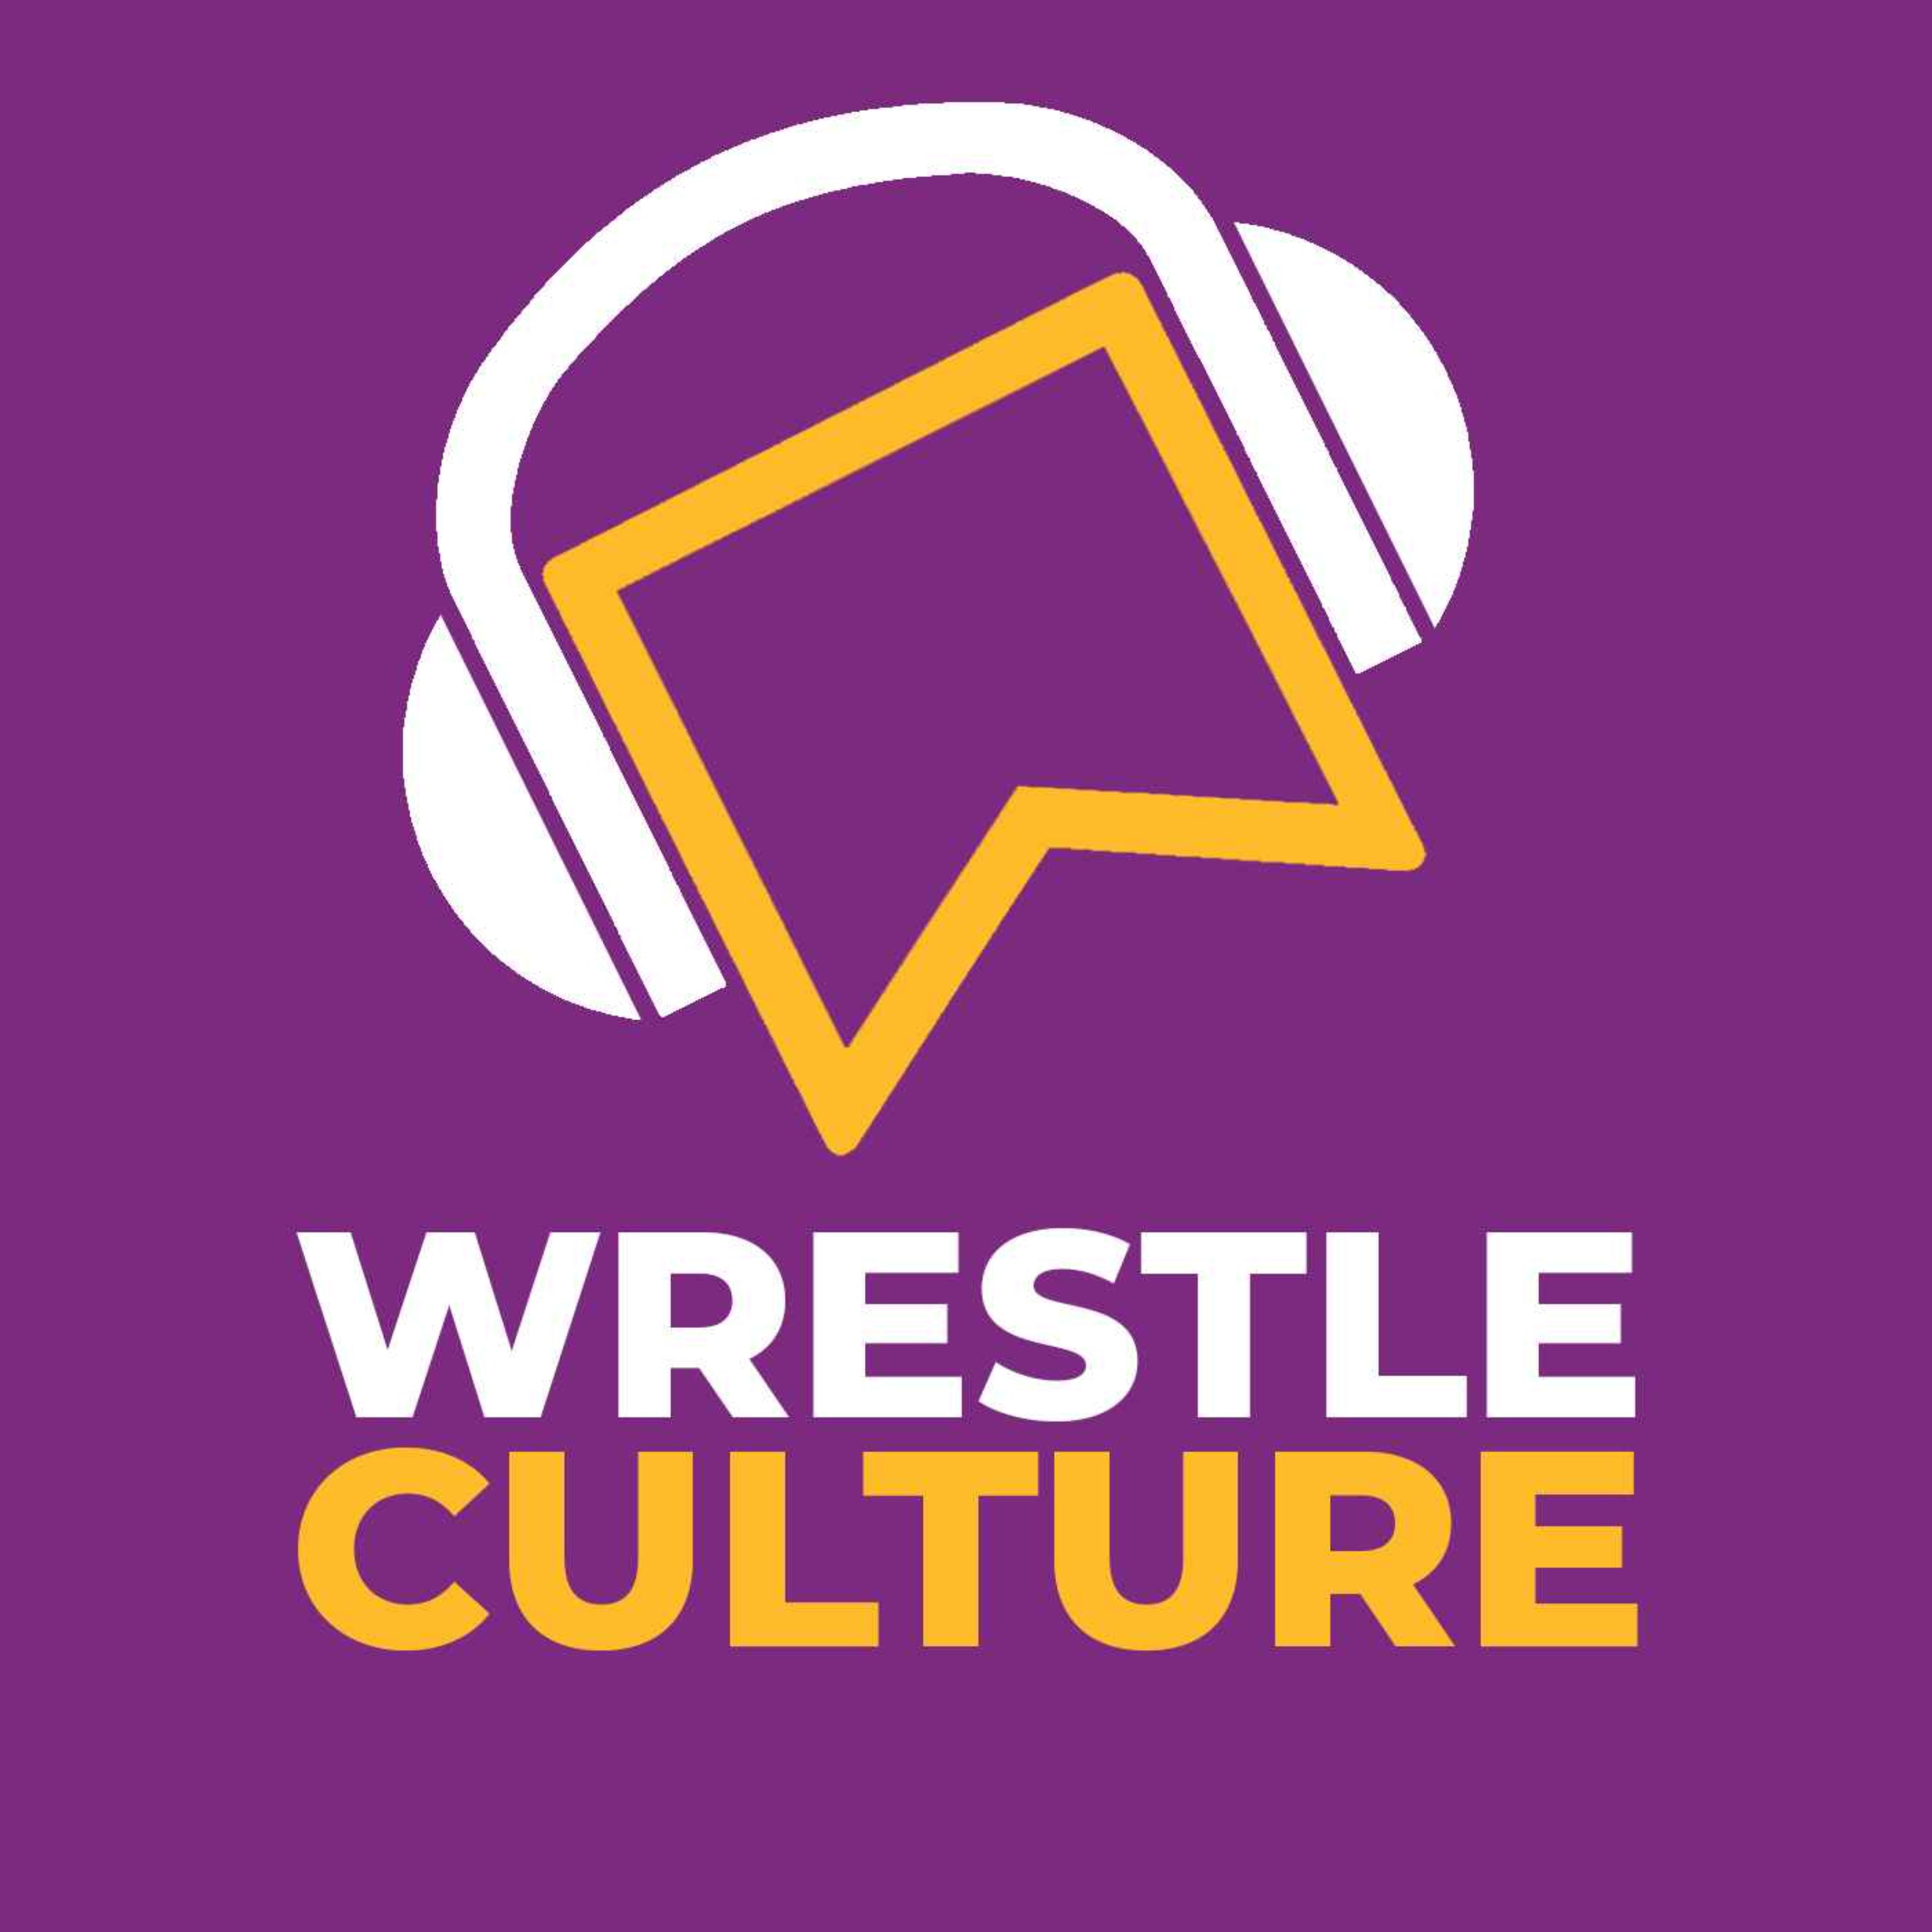 WrestleCulture - Darby Allin RETURNS! A Two-Night SummerSlam? What's Going On With Ricky Starks In AEW? Wrestling Faction Time Travel?!